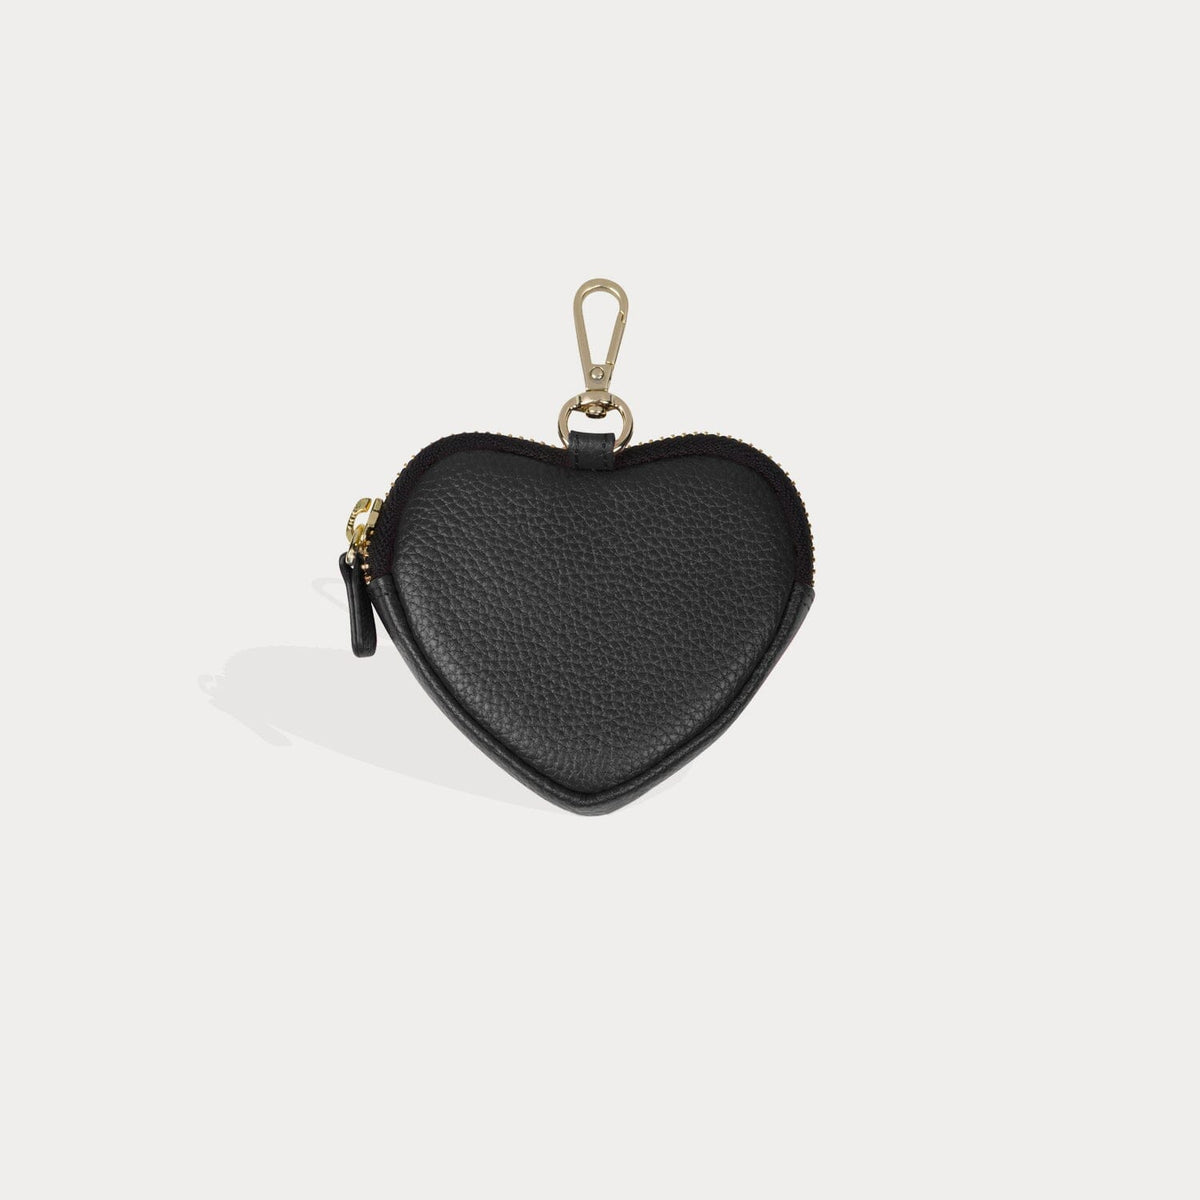 Black Zippered Hearing Aid Case - Unlabeled